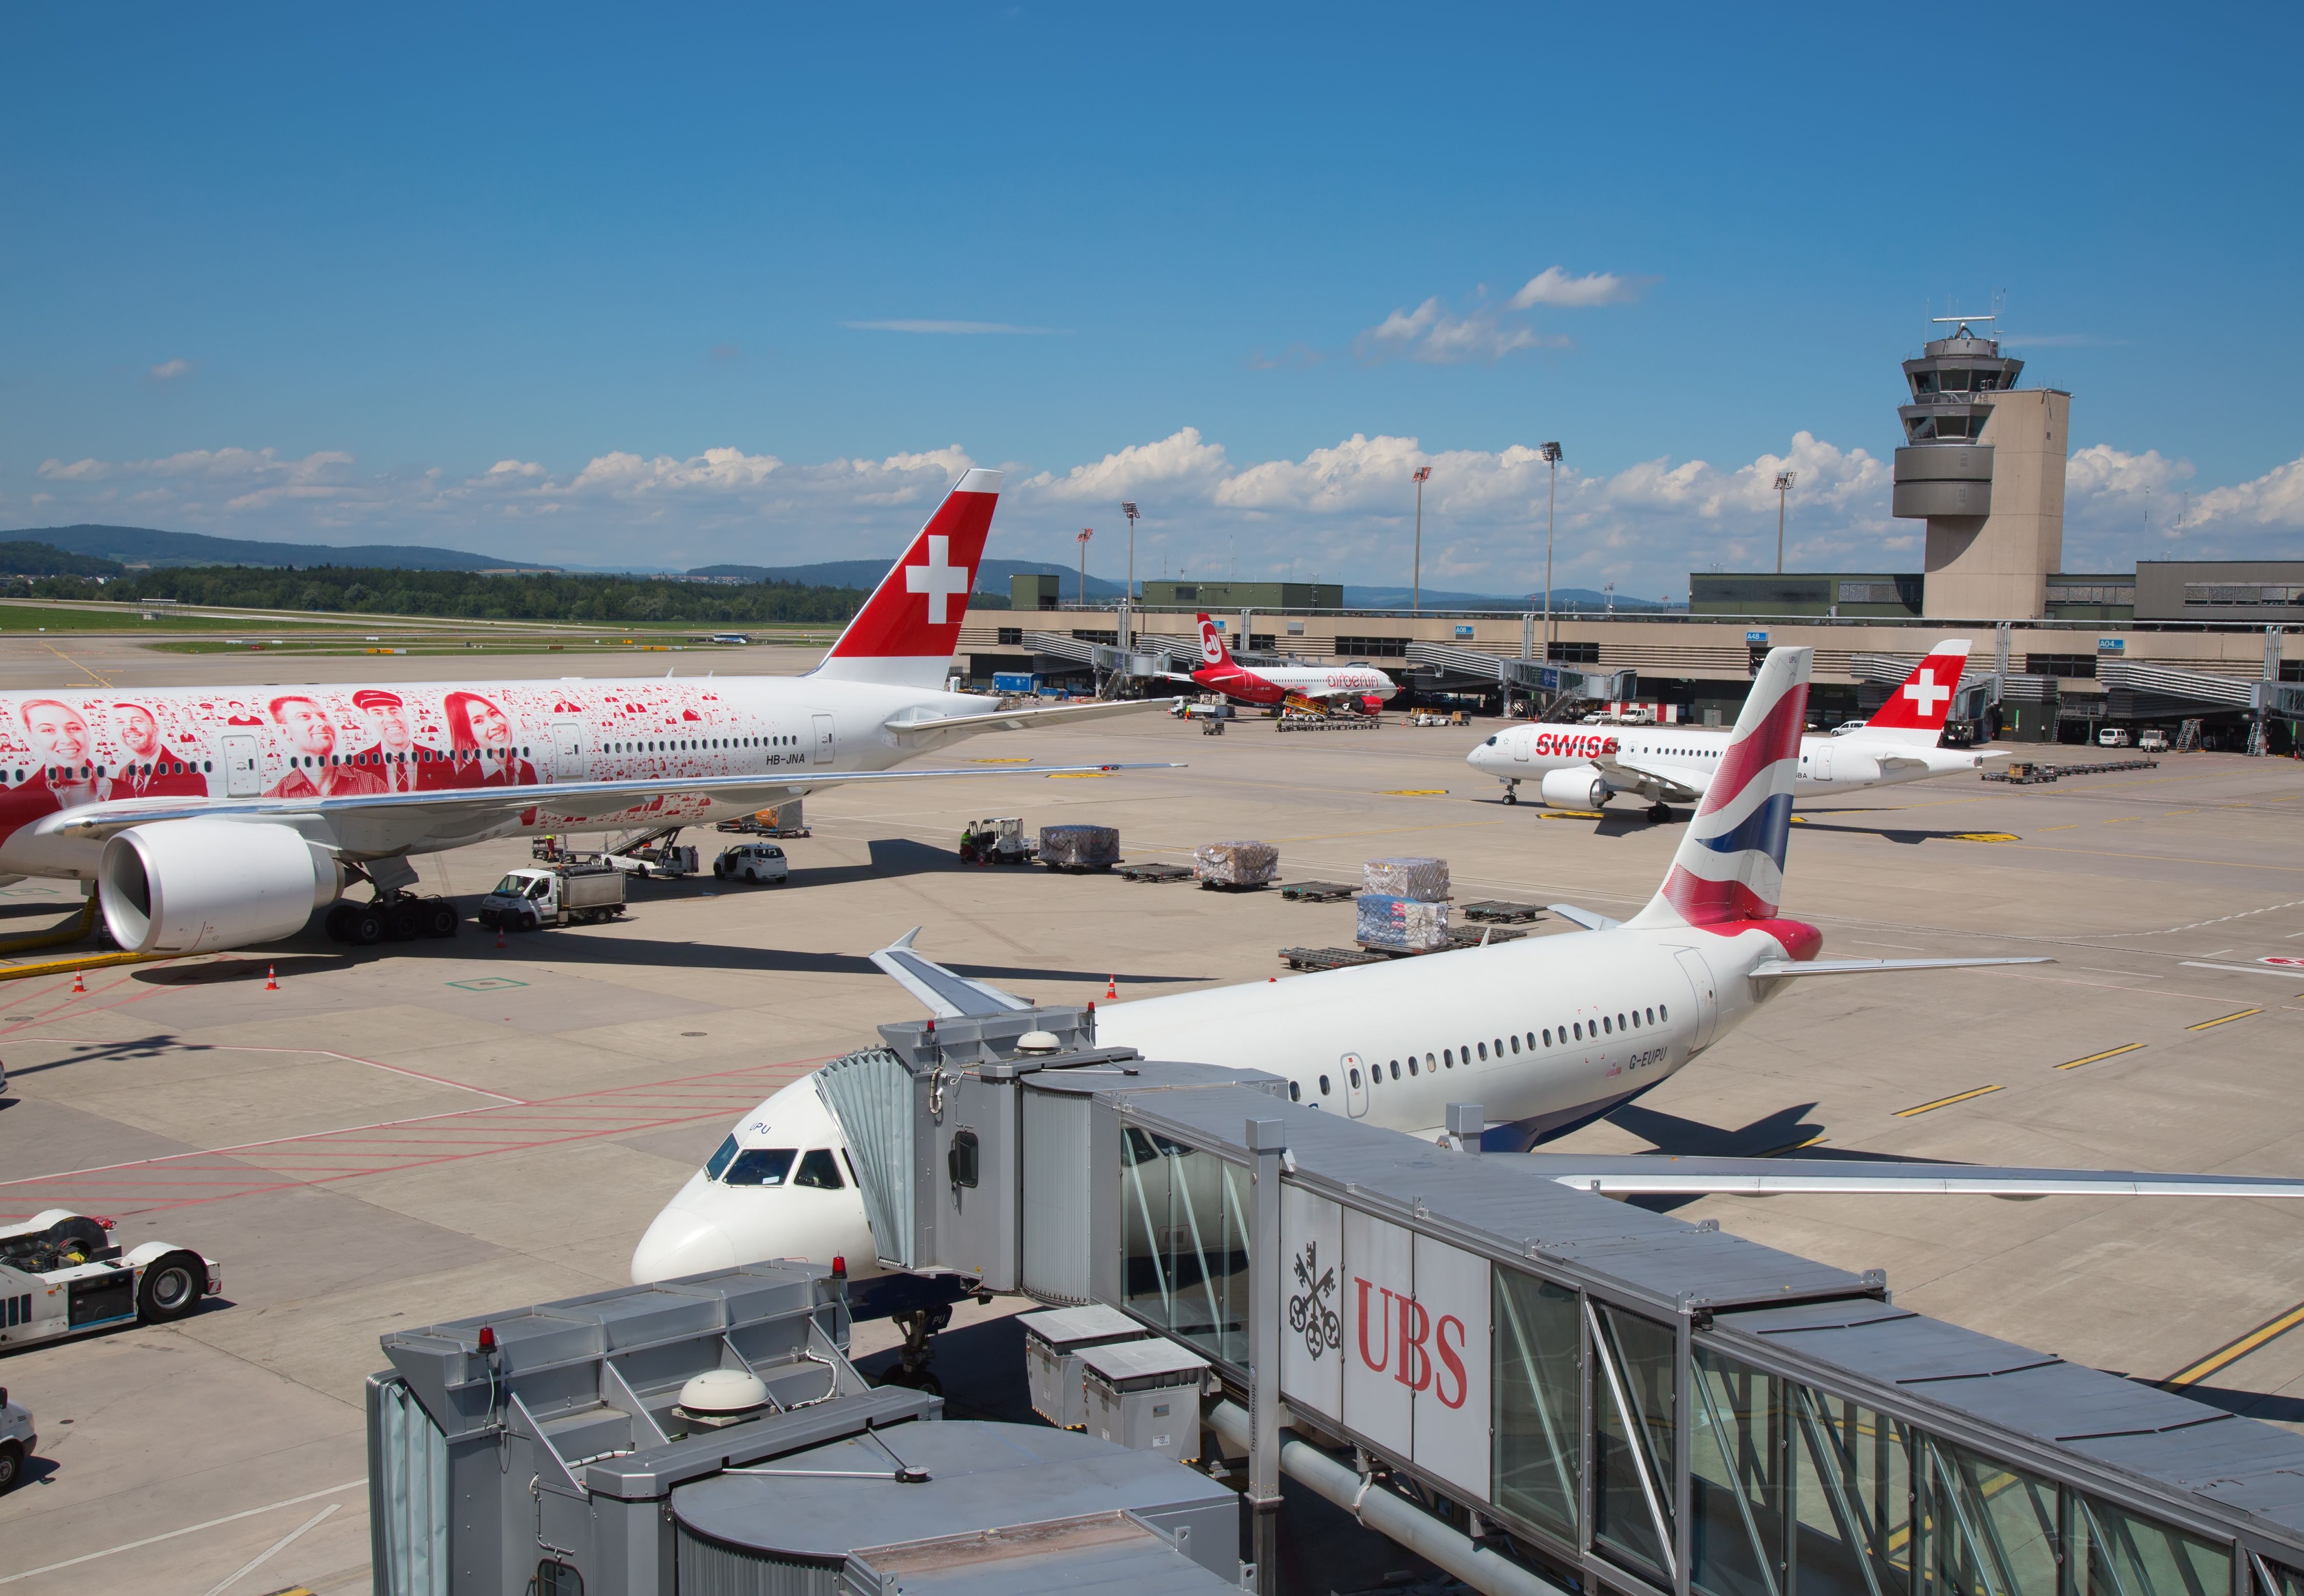 A view of Zurich Airport with SWISS and British Airways aircraft parked at gates.